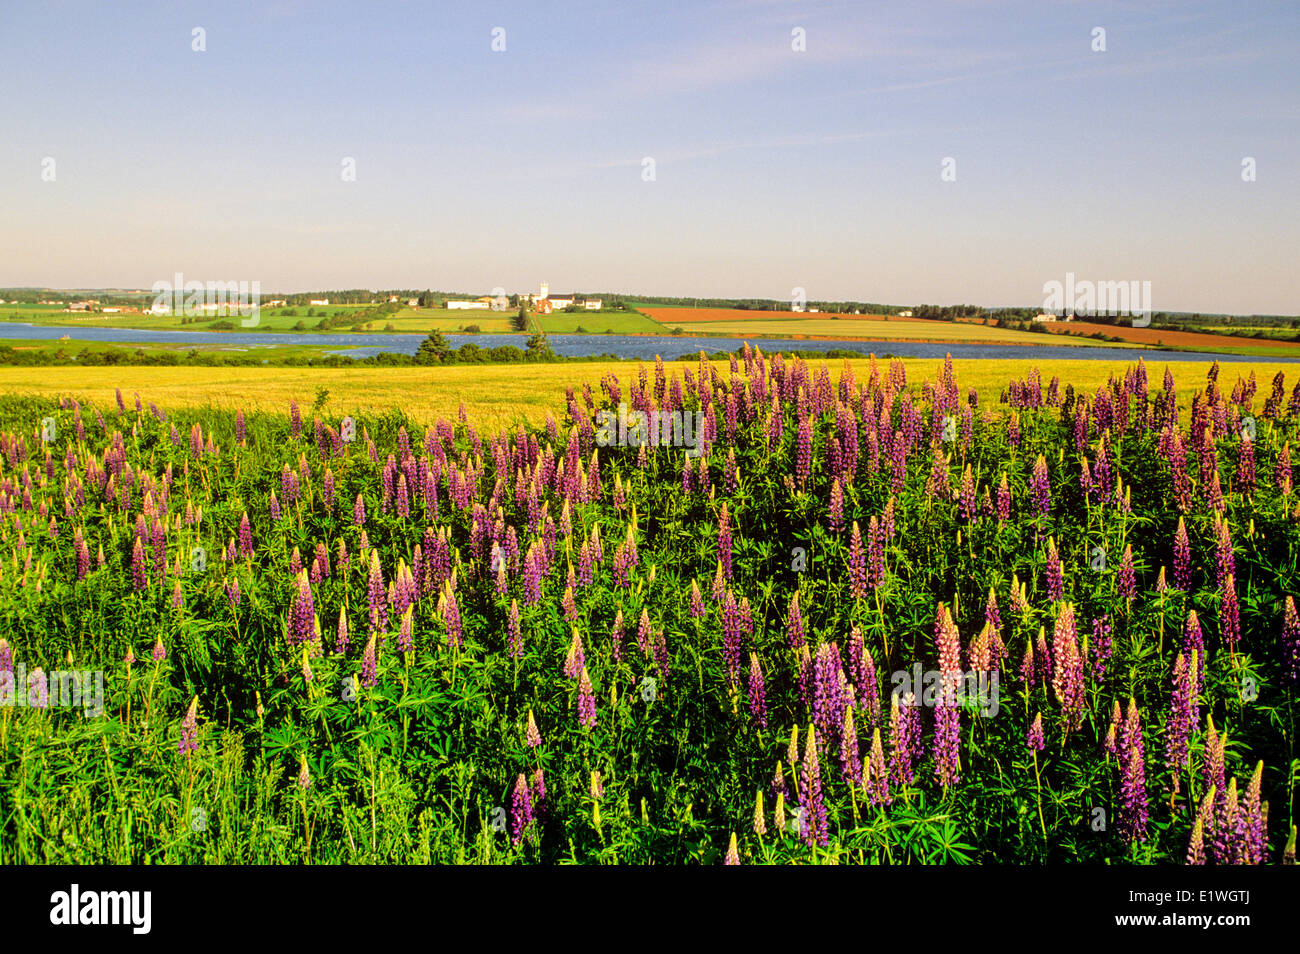 Lupine field with South rustico in background, Prince Edward Island, Canada Stock Photo